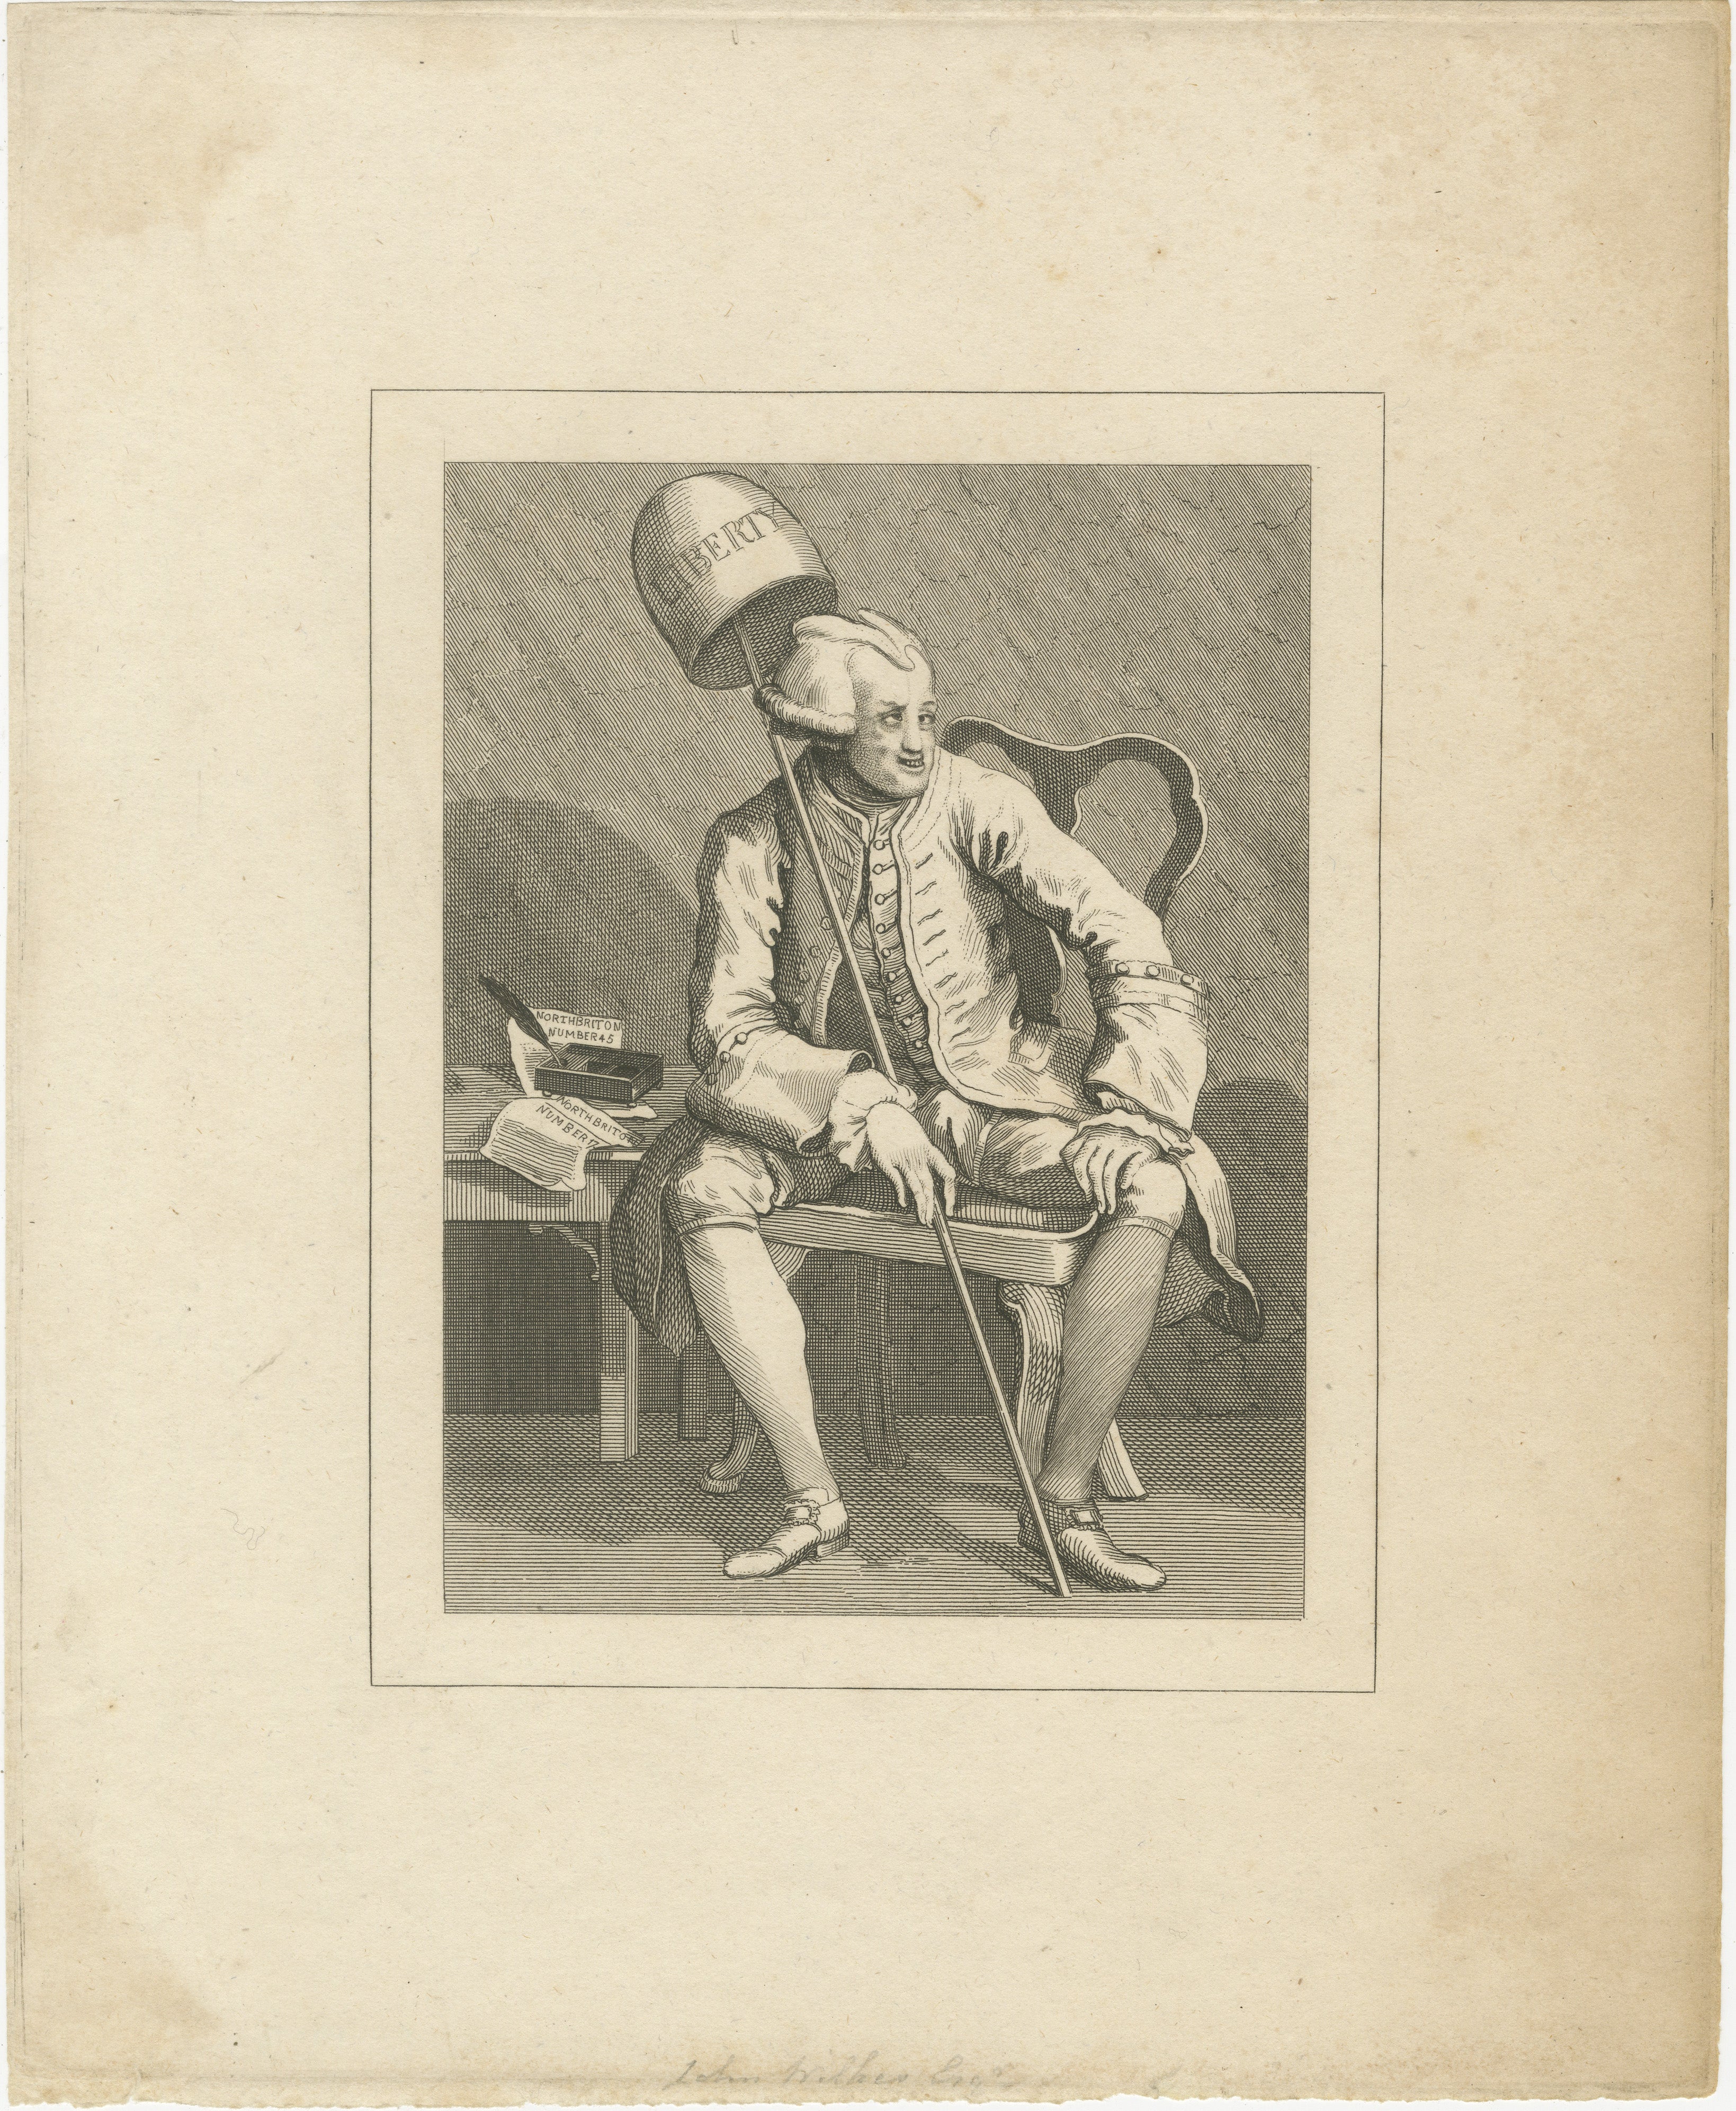 A satirical engraving of John Wilkes, a notable figure in 18th-century British politics known for his radical views and fierce criticism of the monarchy and government. 

Wilkes was a champion of freedom of the press, a critic of British colonial